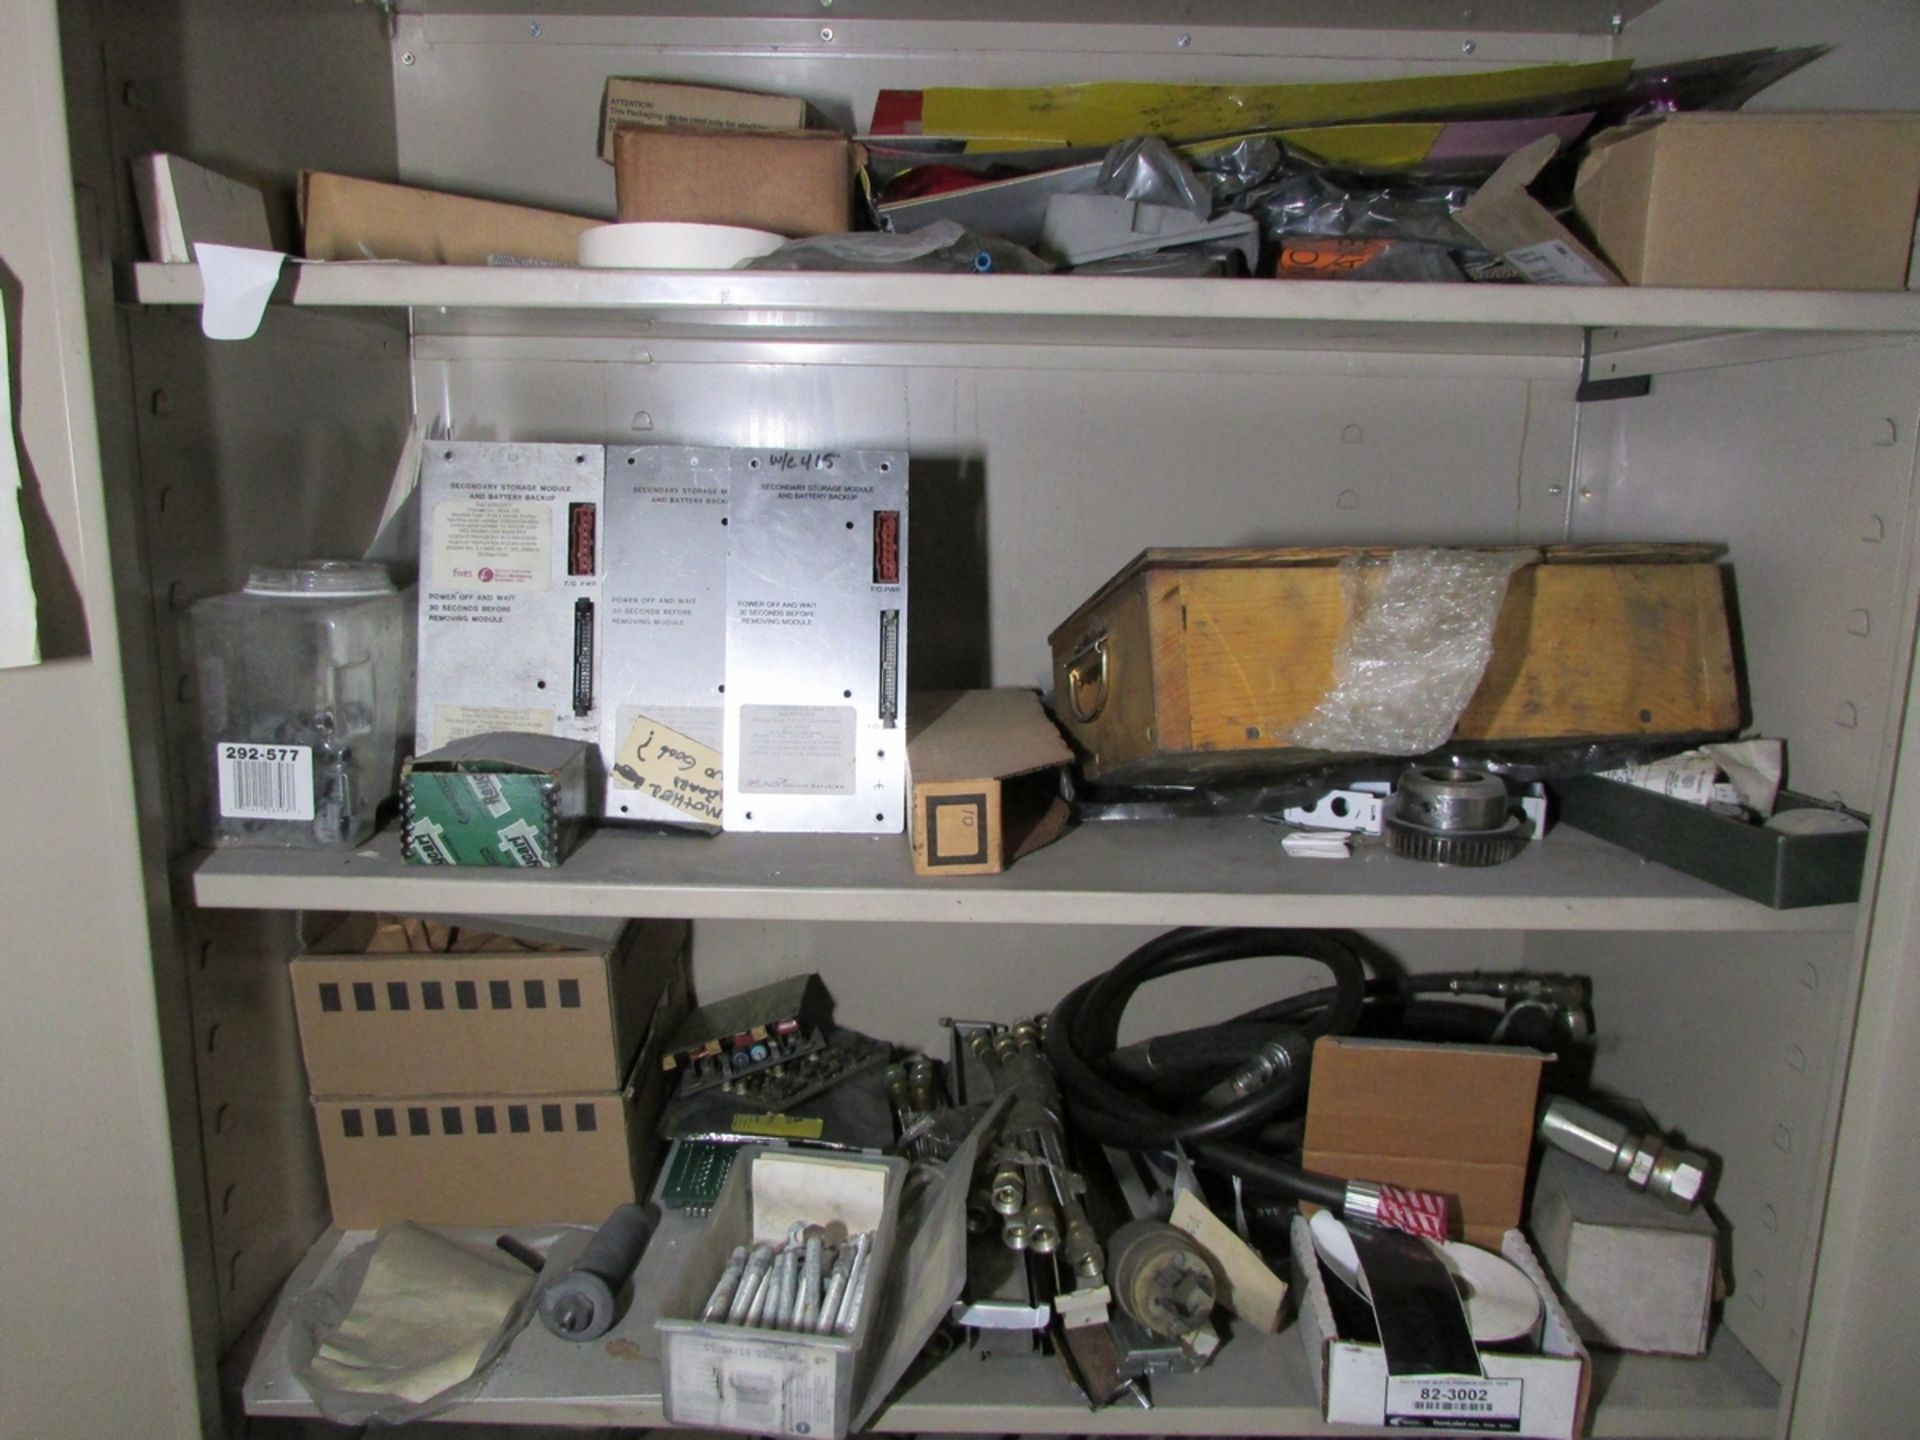 LOT - (3) 2-DOOR CABINETS, W/ CONTENTS: ASSORTED PARTS, FUSES, HARDWARE, ETC. - Image 3 of 10